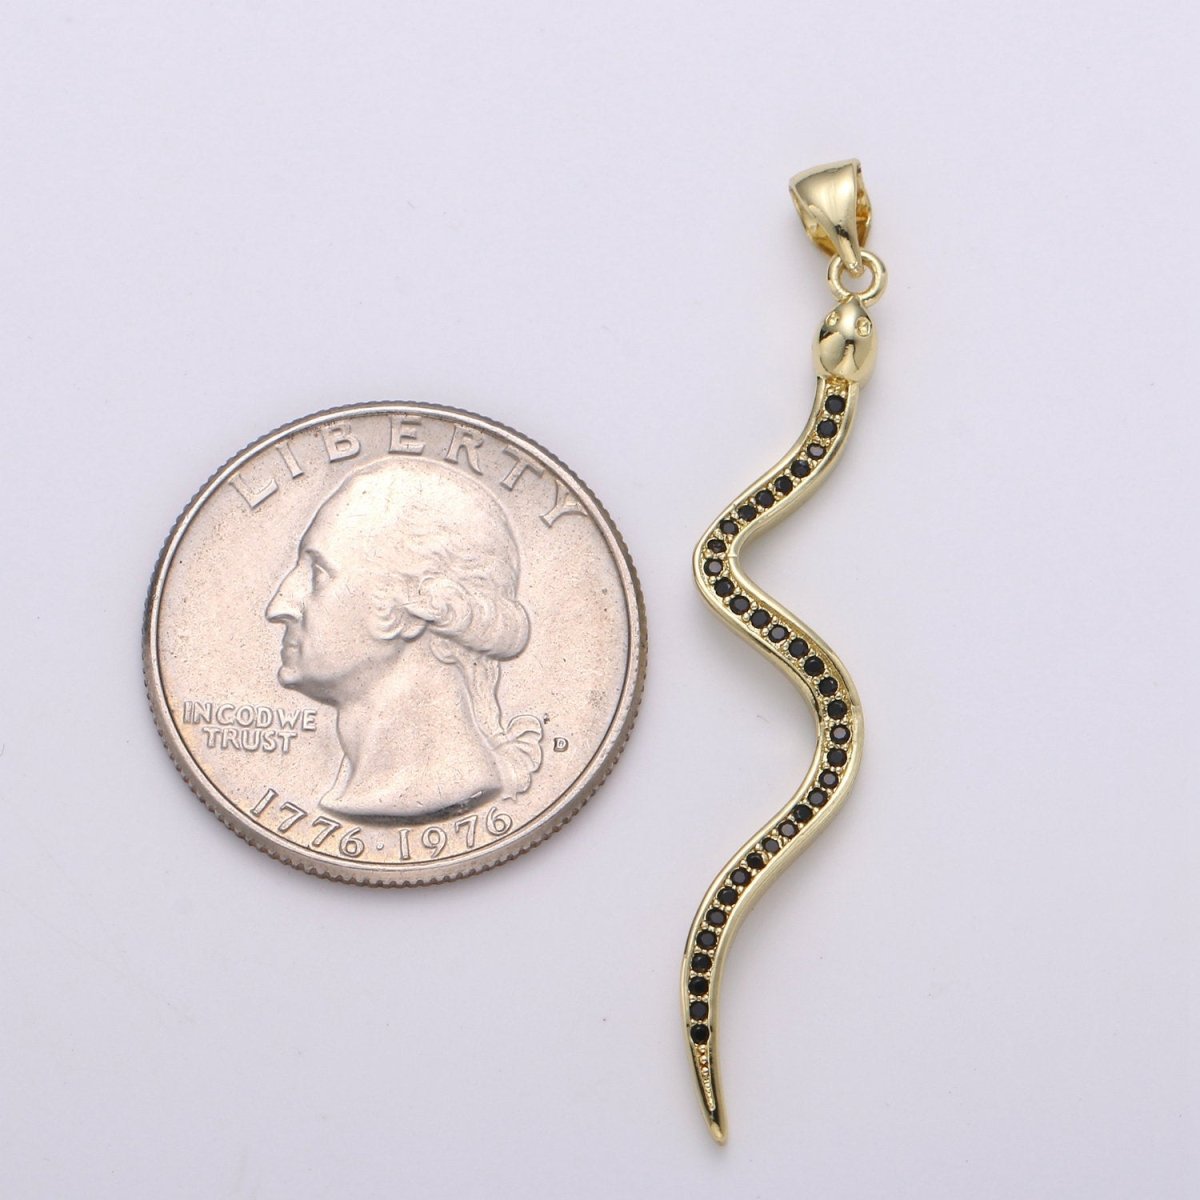 24K Gold Filled Snake Pendant, Gold Snake Charm Micro Pave Pendant Serpent Jewelry for Necklace Component I-780 - DLUXCA